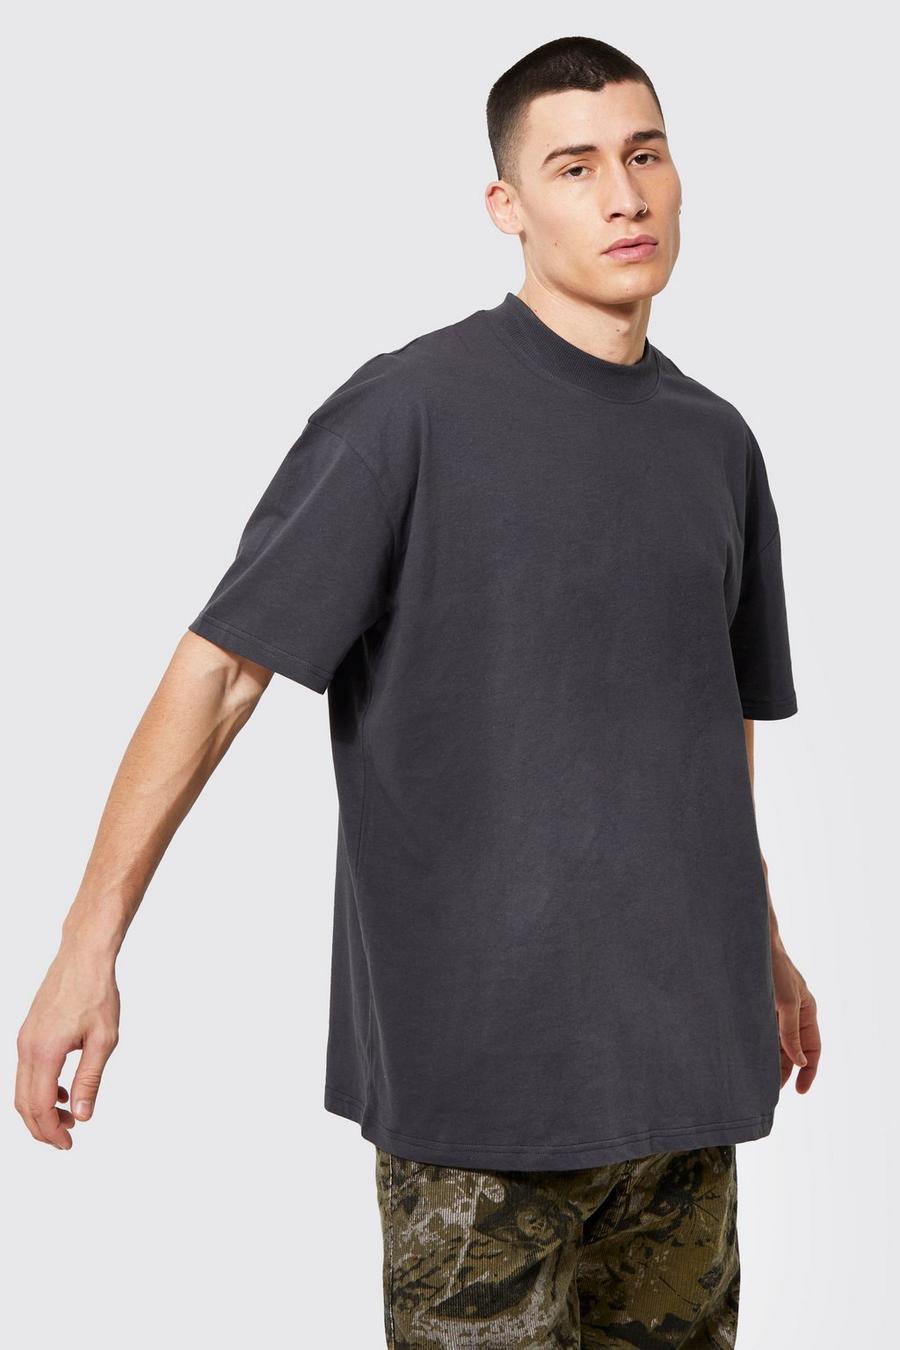 Charcoal grey Oversized Extended Neck T-Shirt